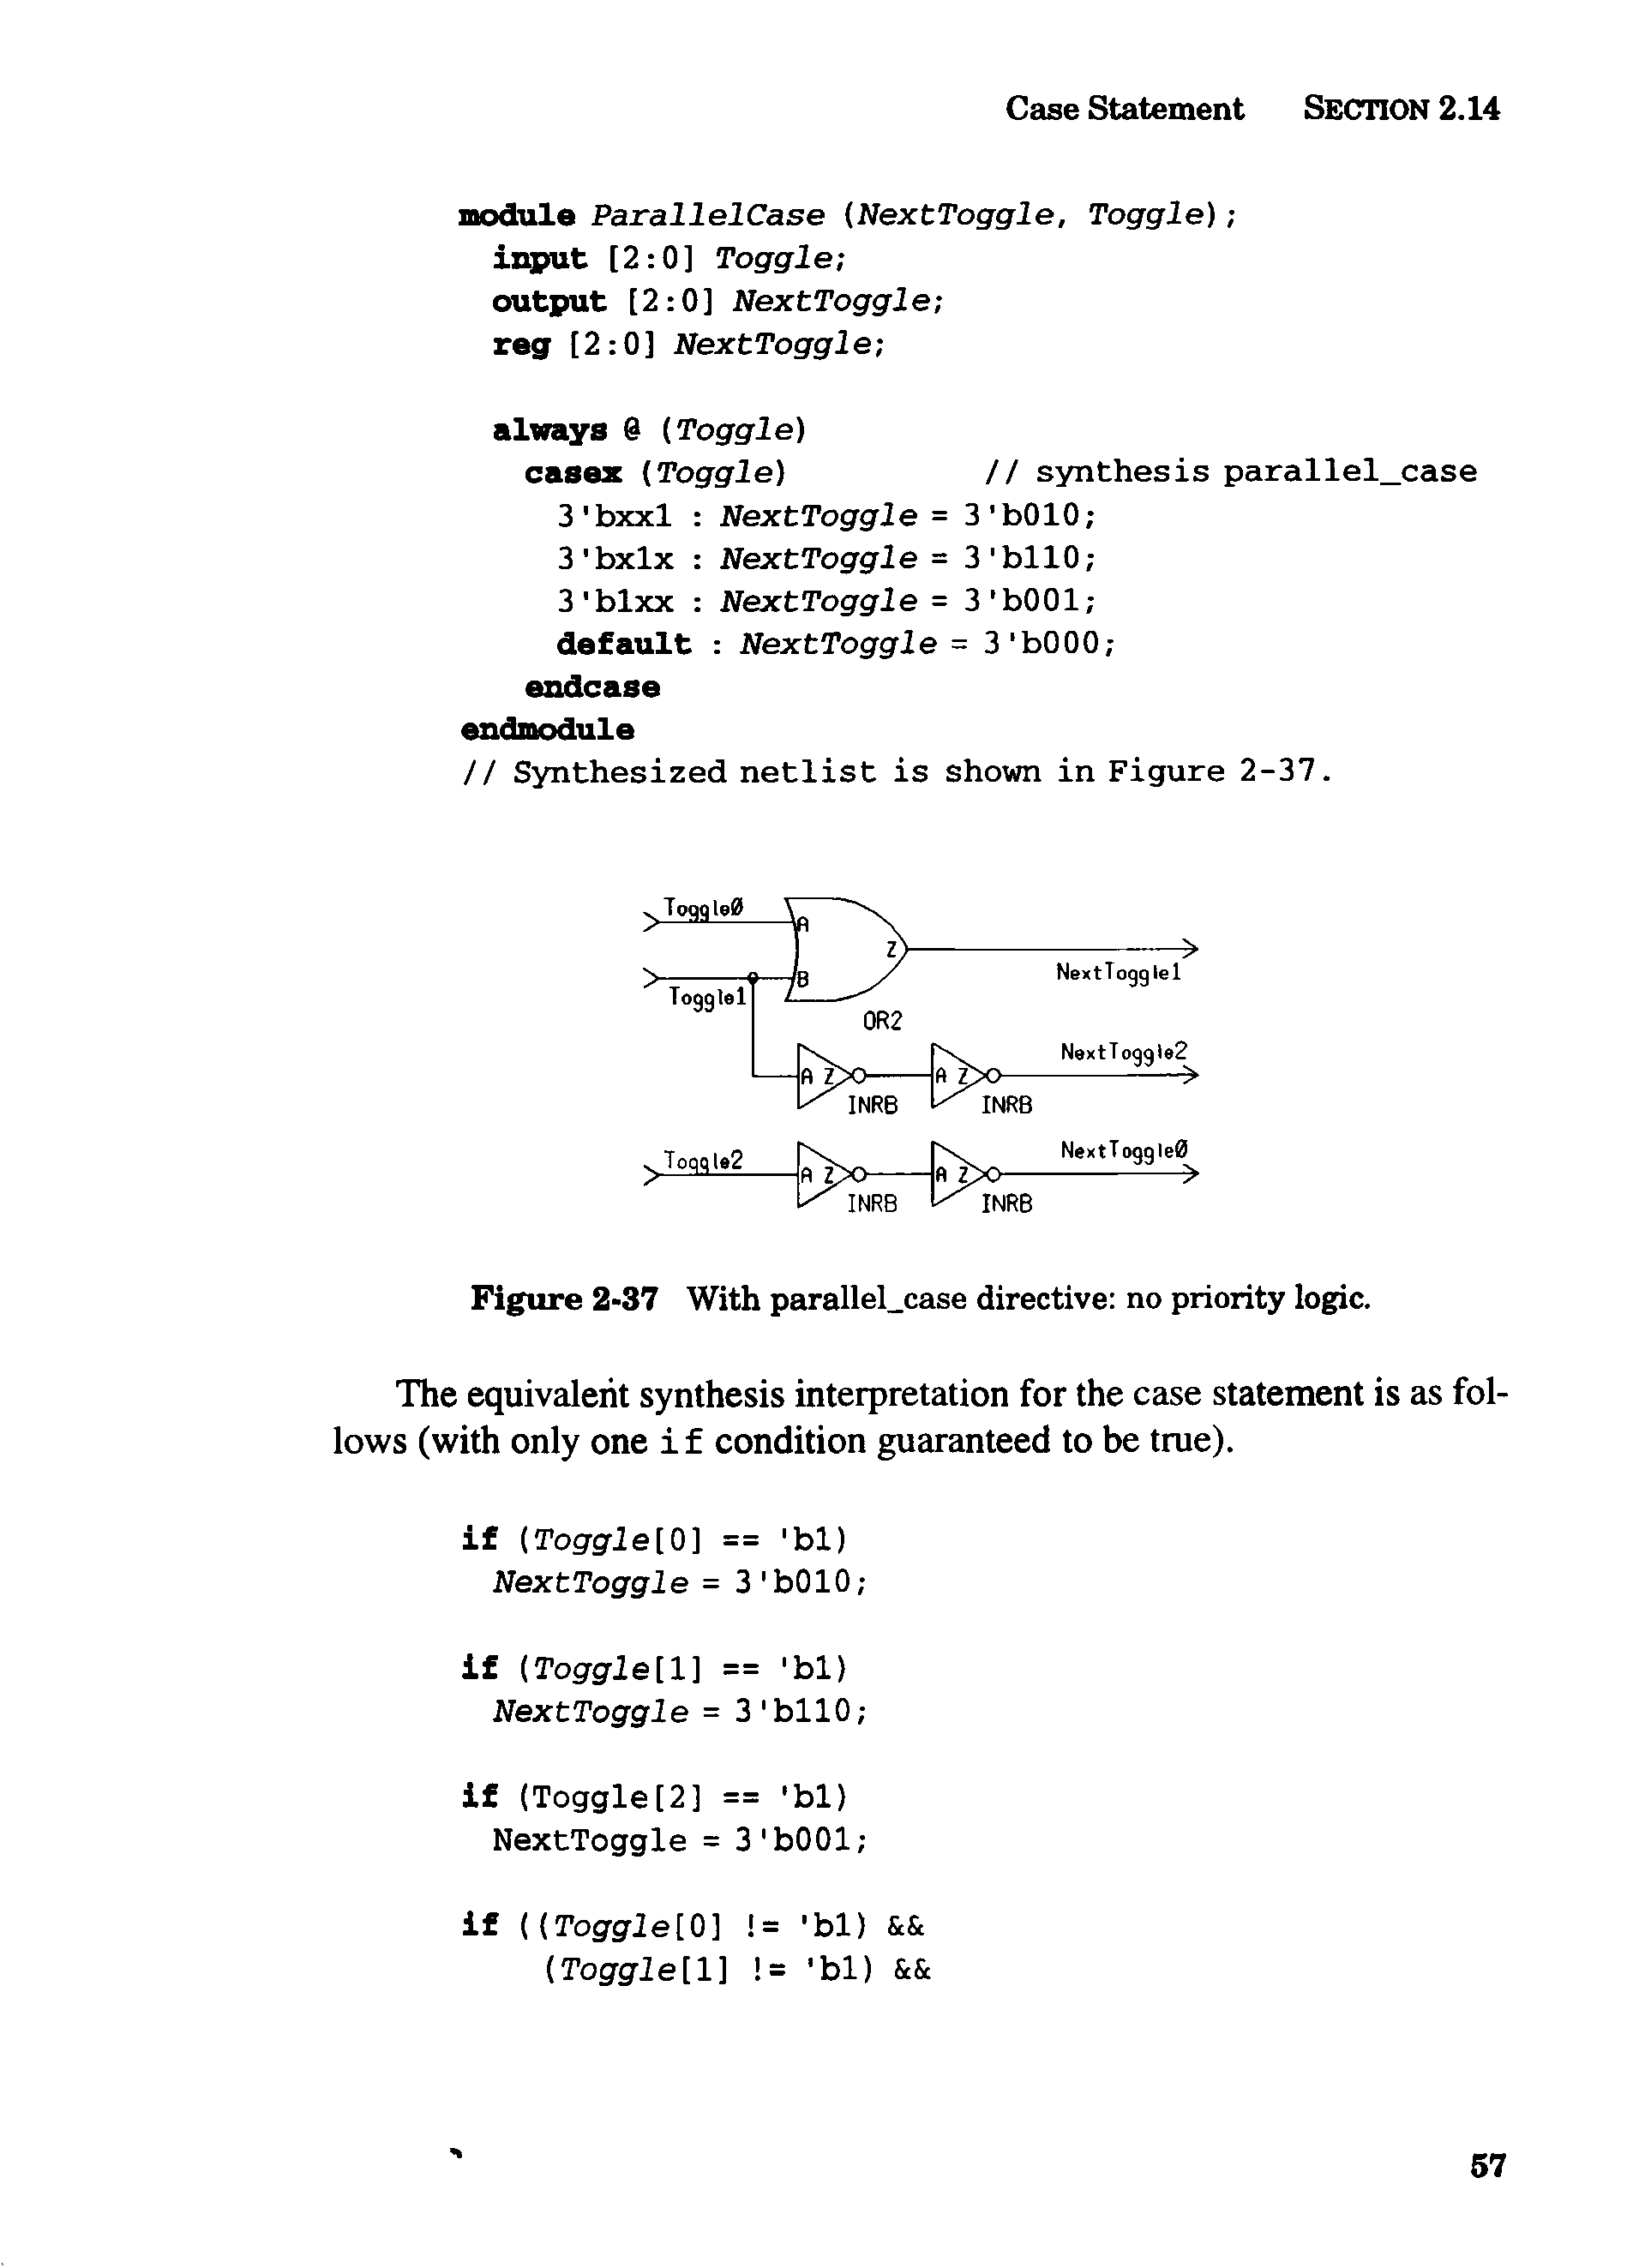 Figure 2-37 With parallel case directive no priority logic.